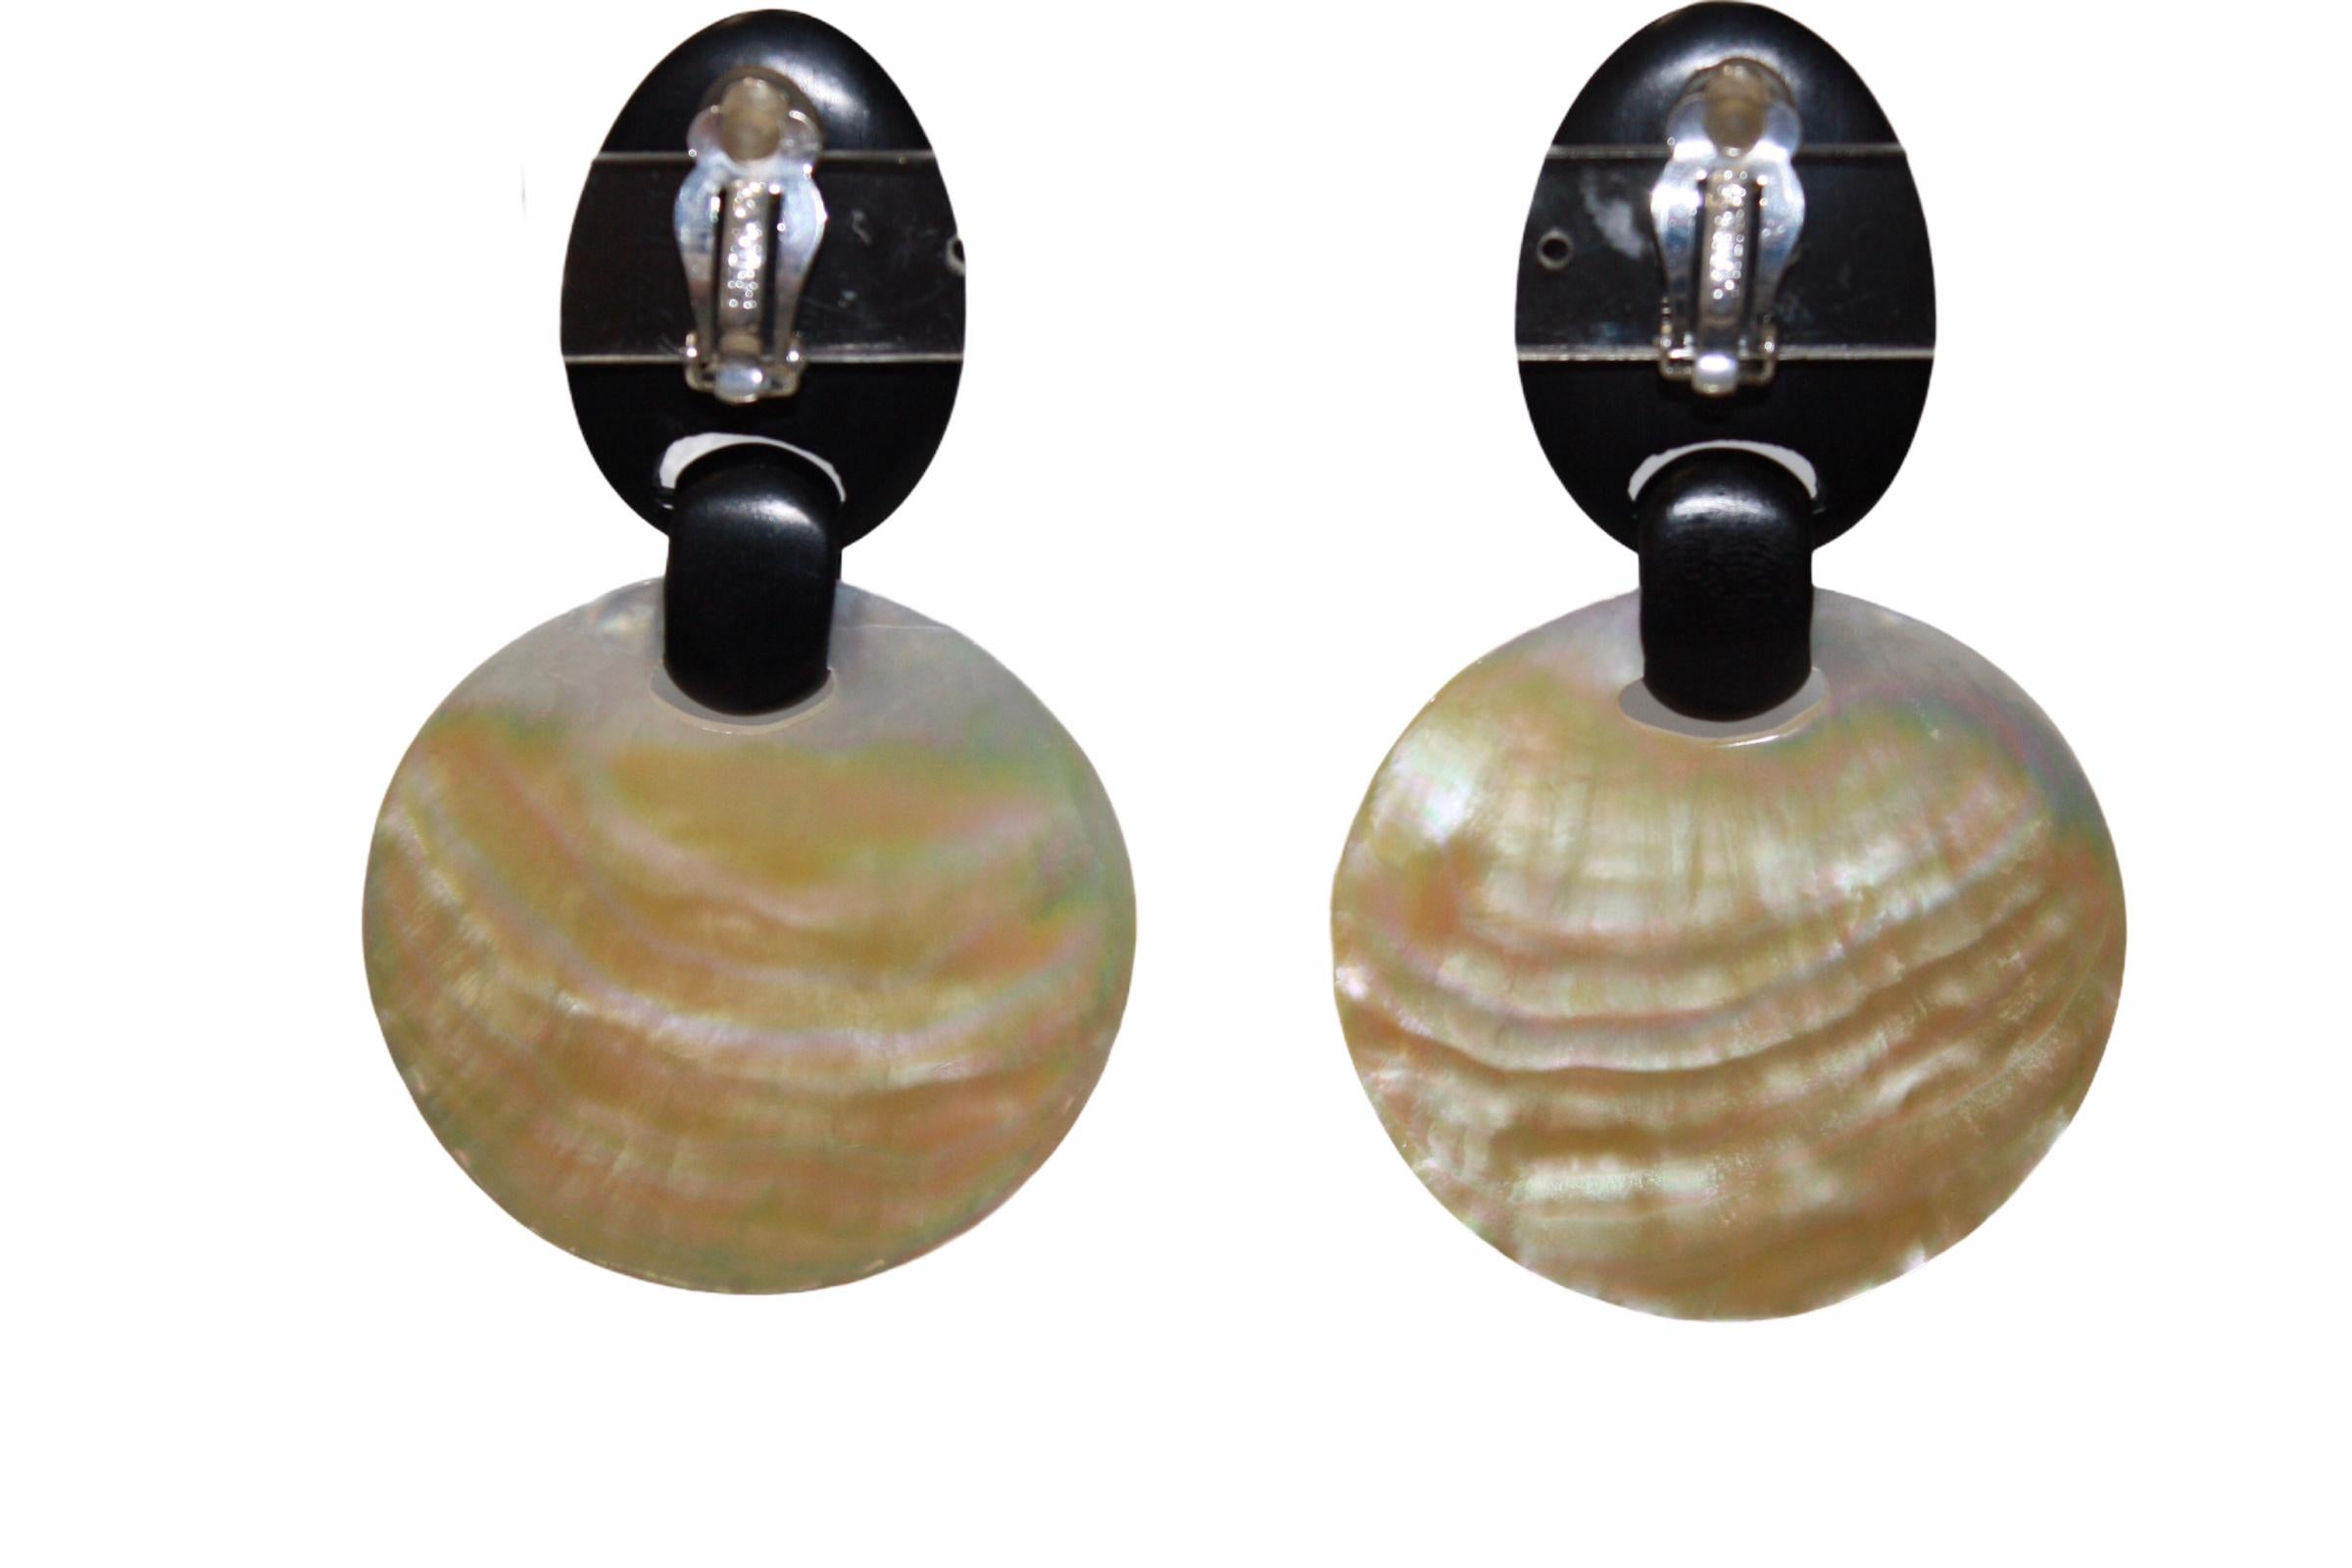 Clip earrings in mother of pearl and ebony. Signature on clip